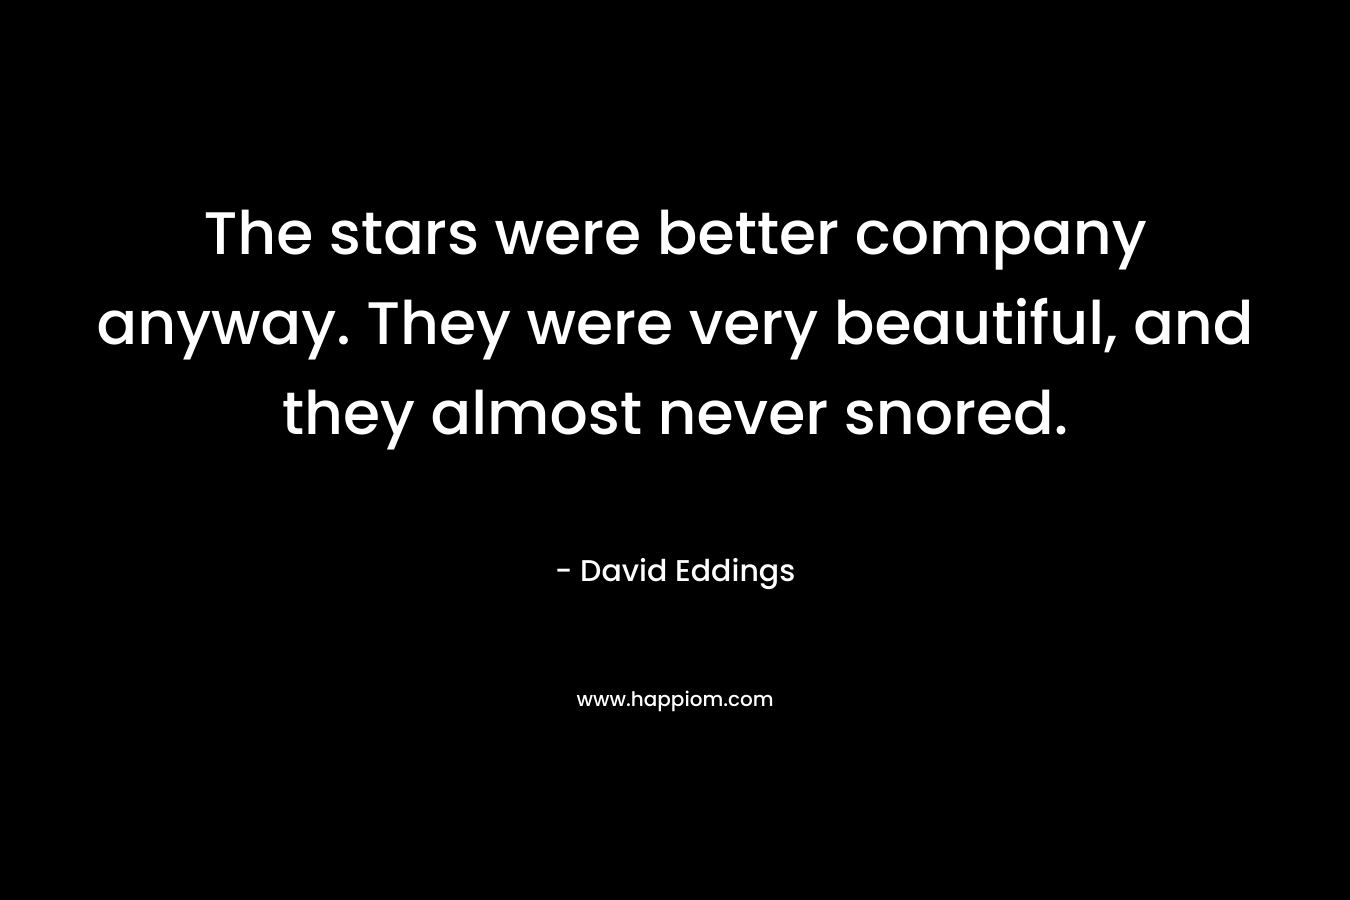 The stars were better company anyway. They were very beautiful, and they almost never snored.